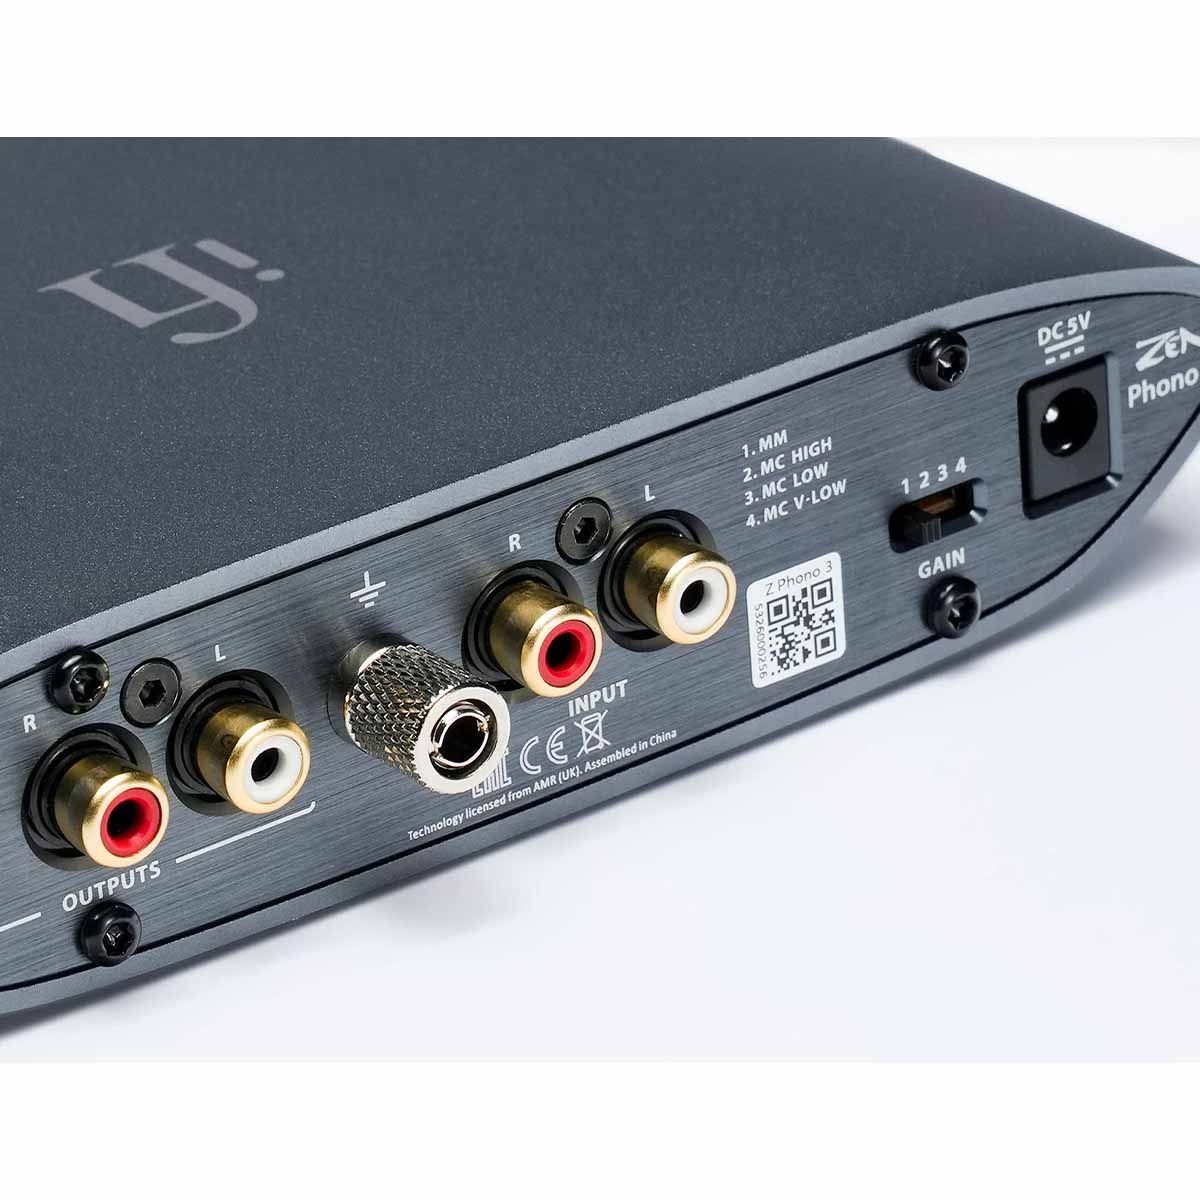 iFi Audio ZEN Phono 3 Desktop Phono Stage Preamp - zoomed rear components view